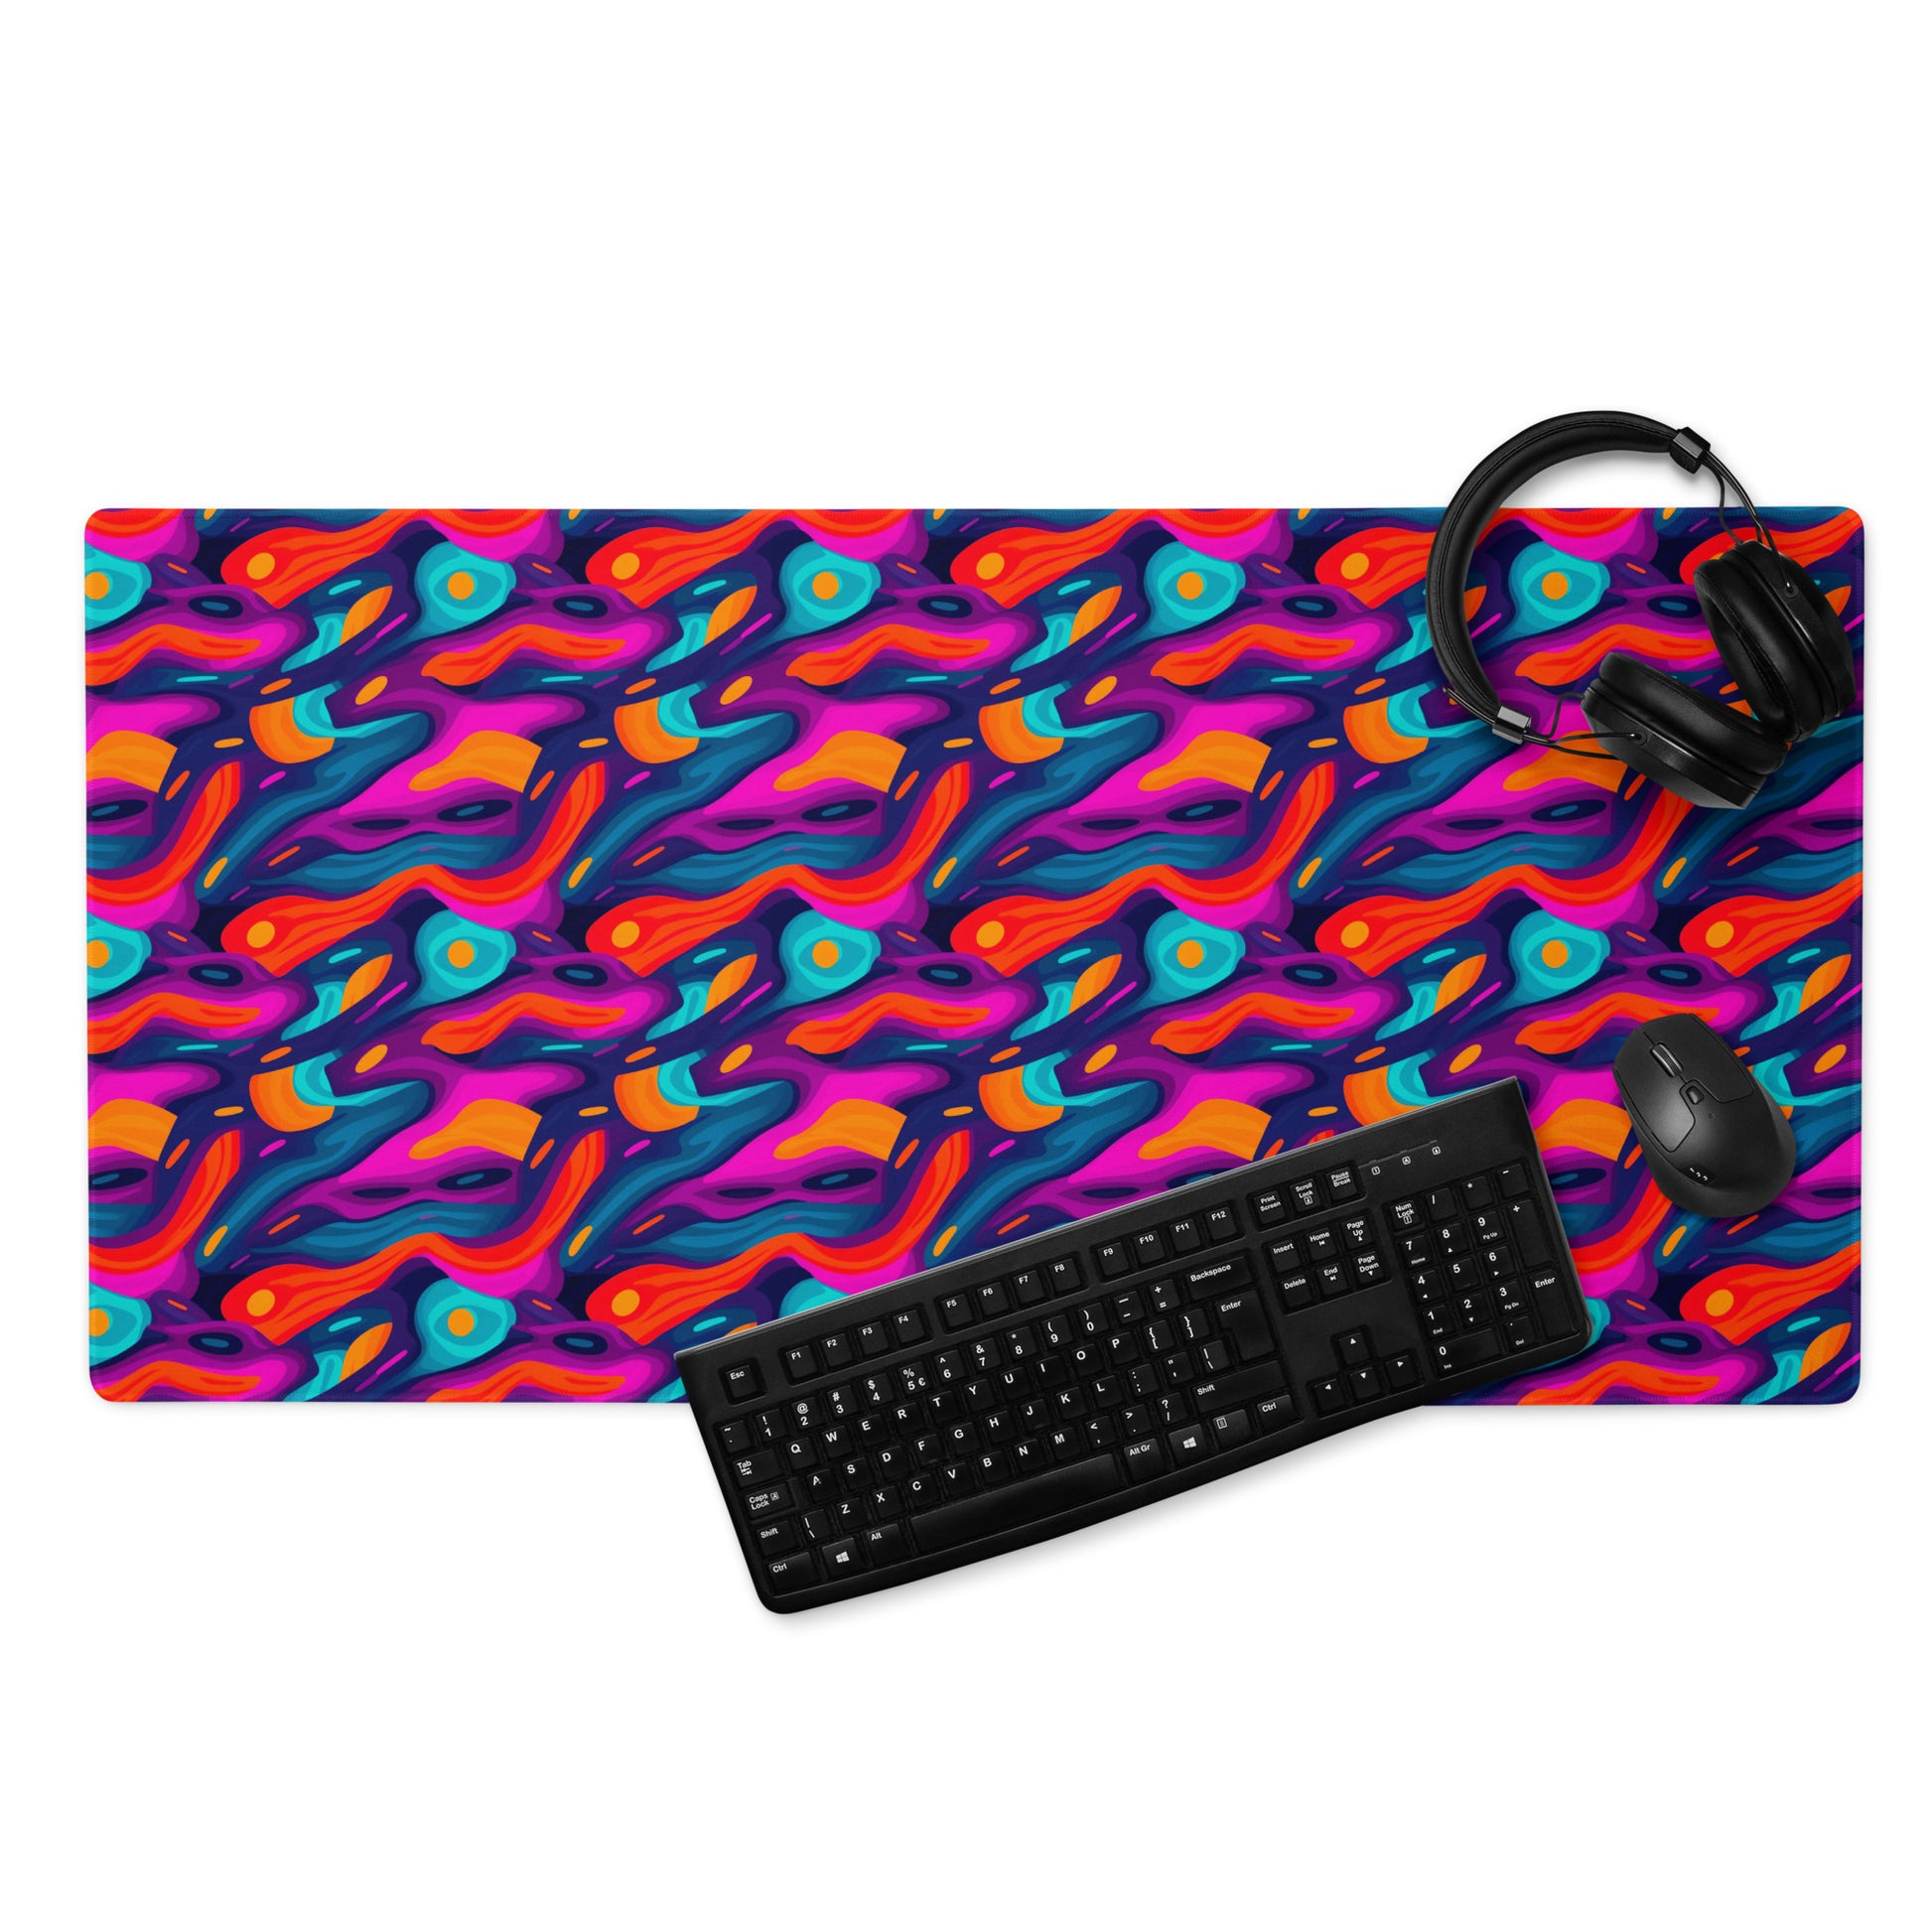 A 36" x 18" desk pad with a wavy abstract pattern on it displayed with a keyboard, headphones and a mouse. Blue, Purple and Red in color.